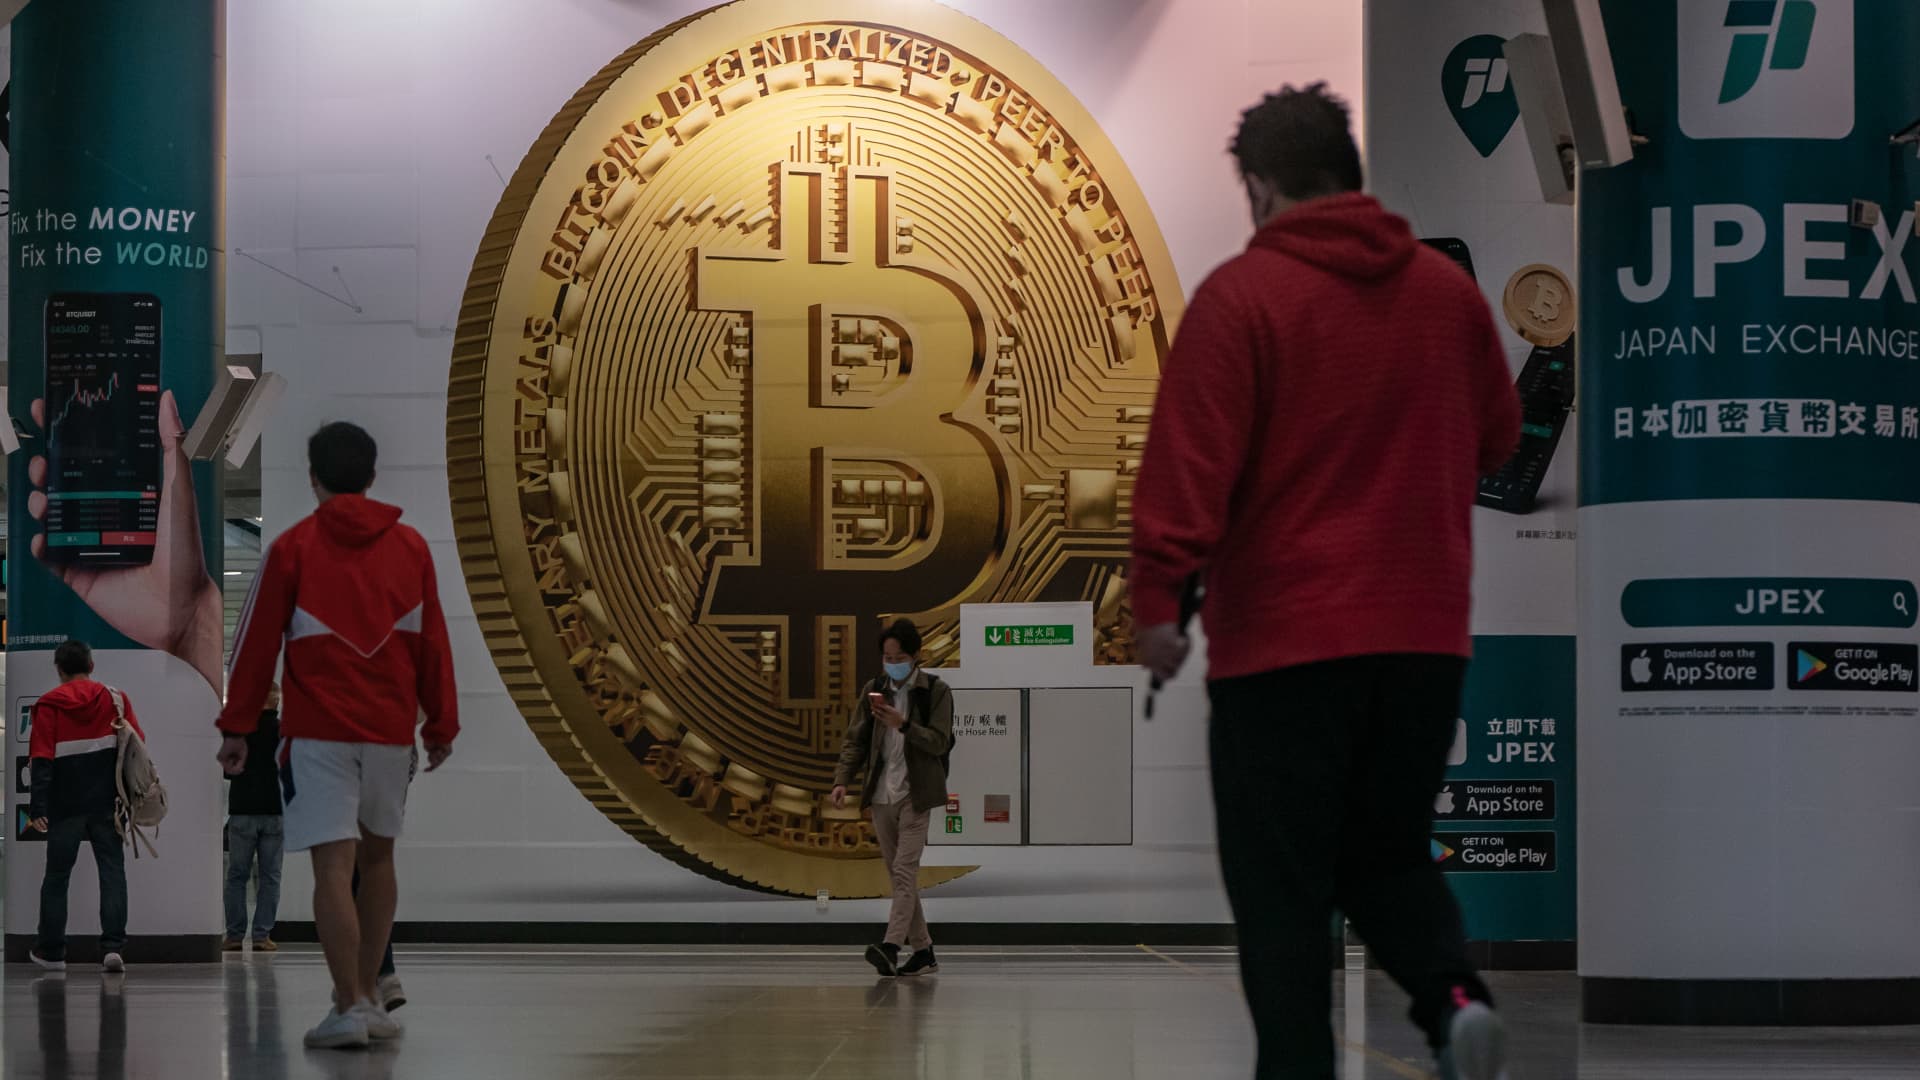 Pedestrians walk past an advertisement displaying a Bitcoin cryptocurrency token on February 15, 2022 in Hong Kong, China.